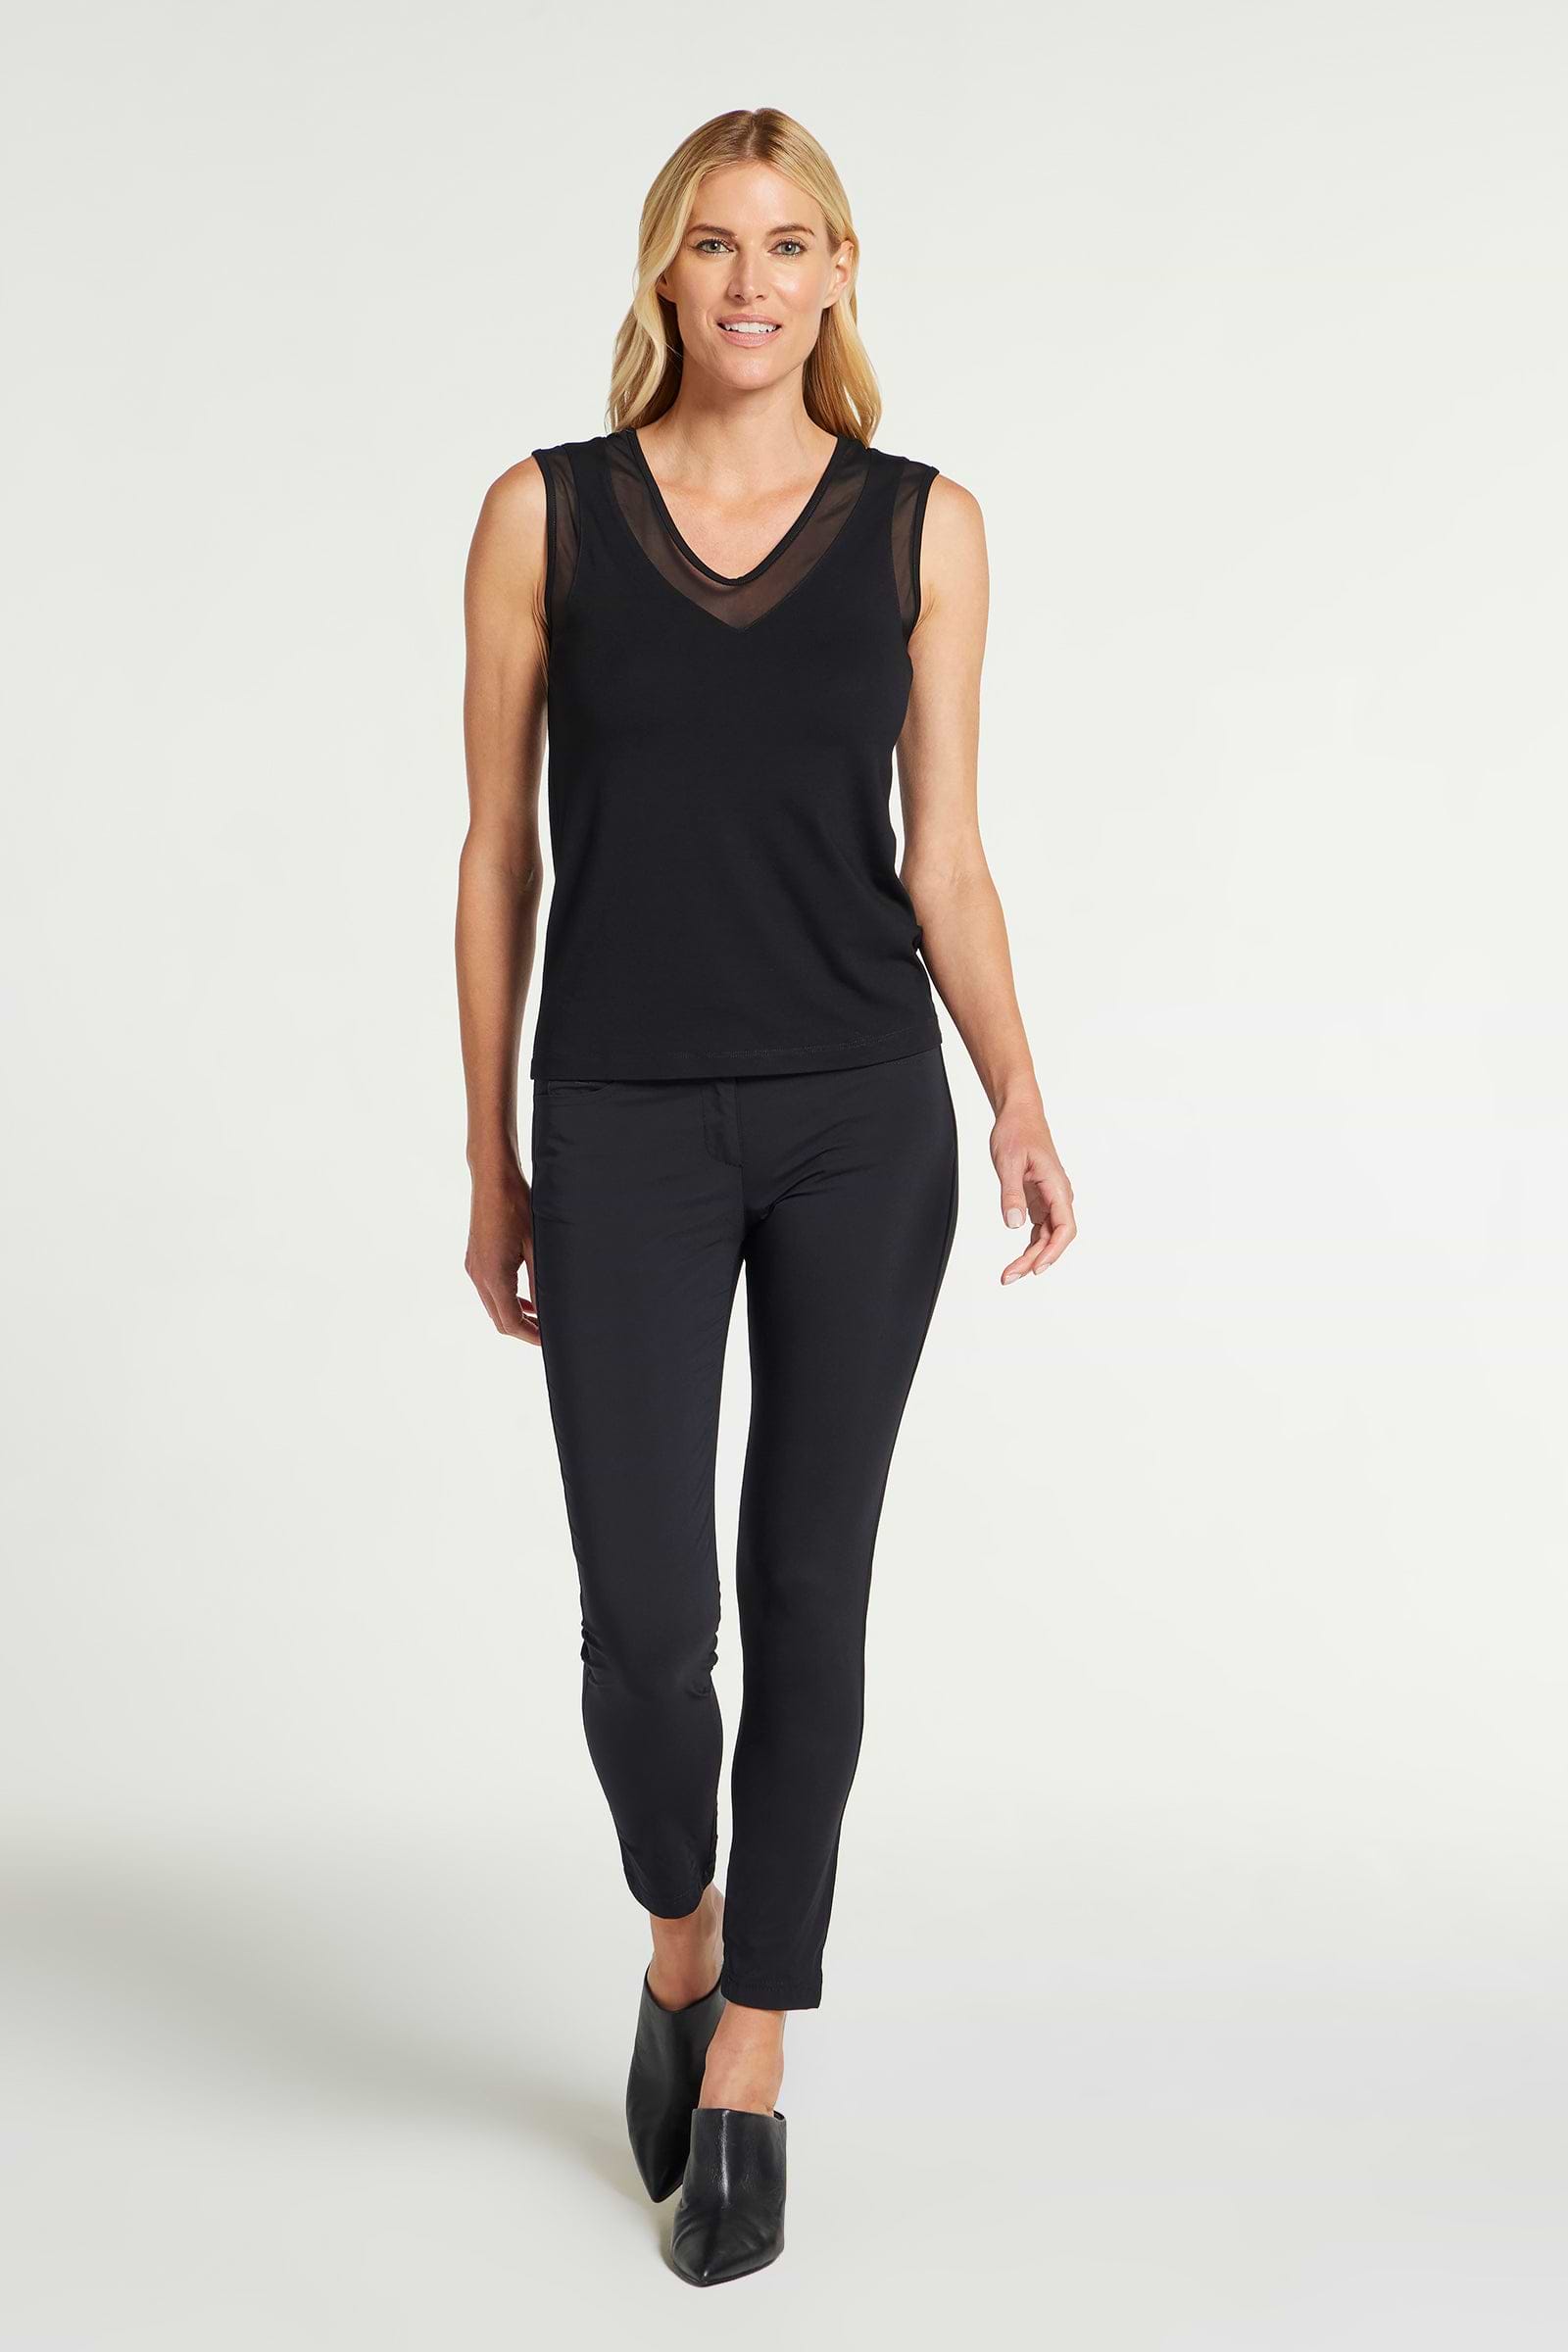 The Best Travel Tank Top. Woman Showing the Front Profile of a Jackson Pima Tank in Black.